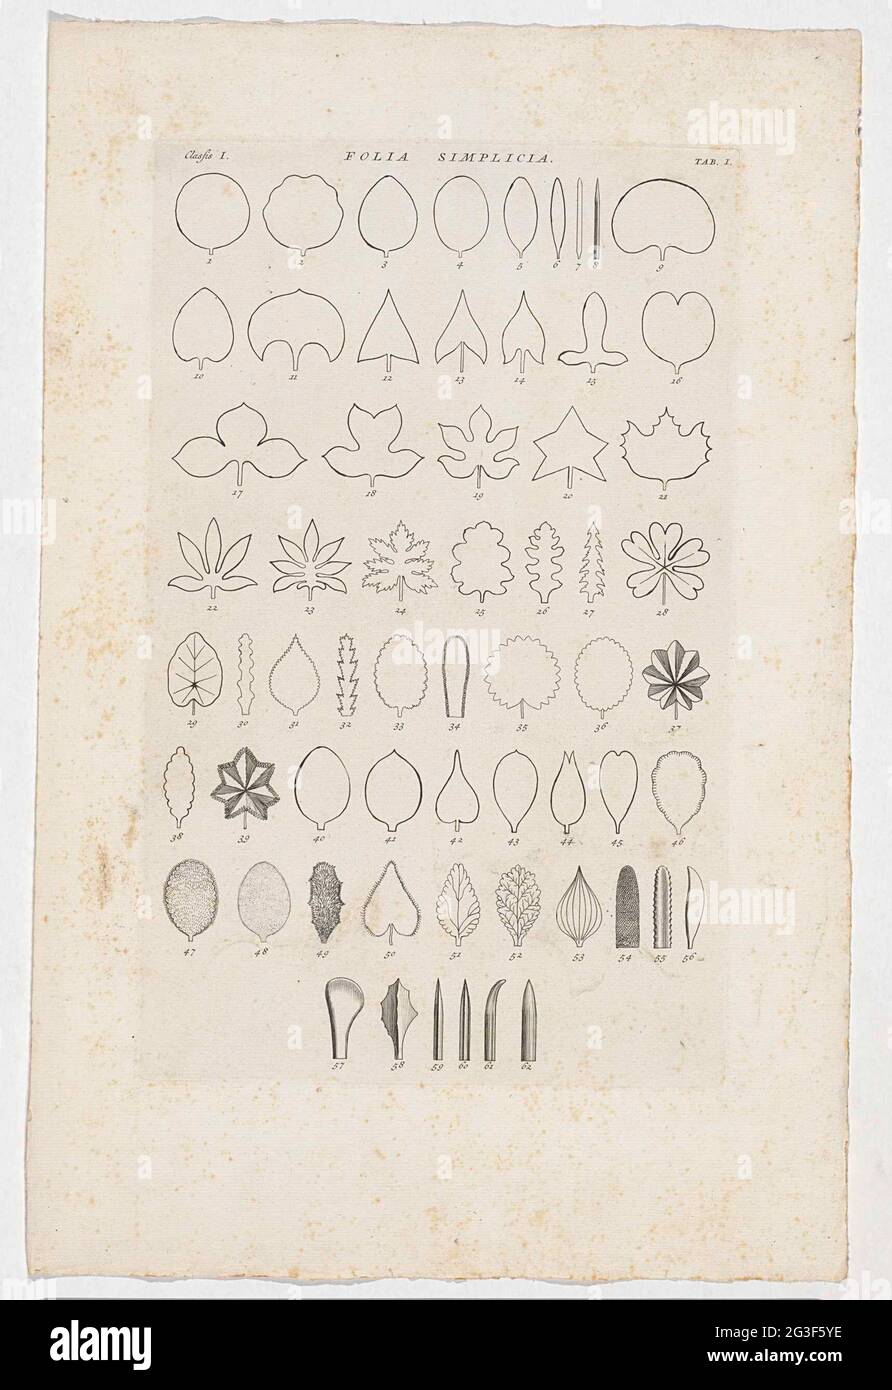 Sheet with circumference of 62 leaves of different plants; Folia Simplicia. The leaves are numbered 1-62. Below: Classis I. At the top right labeled: Tab: I. Stock Photo